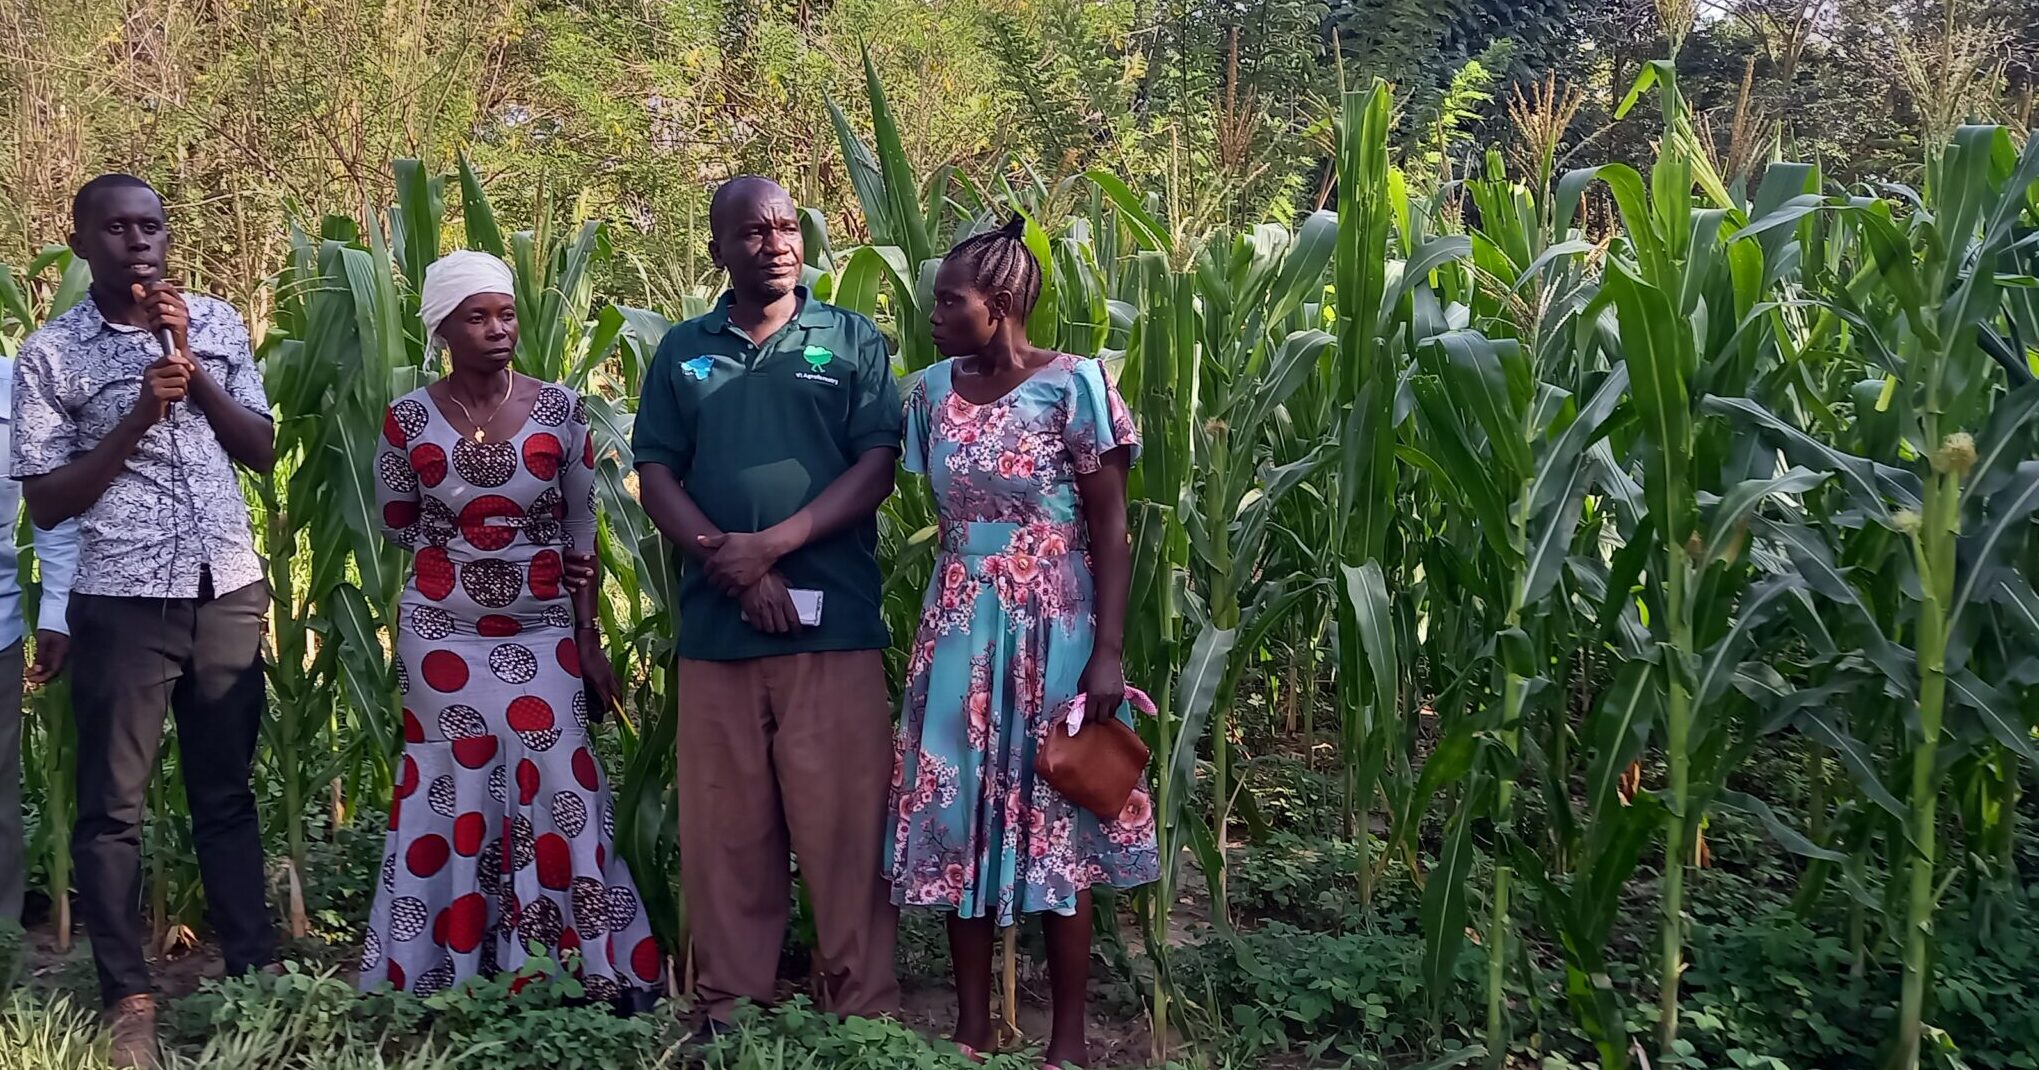 During the visits, GA visitors could listen the testimonials of local farmers. On this photo is represented farmer Mwajuma Shaban and her family in front of the maize field